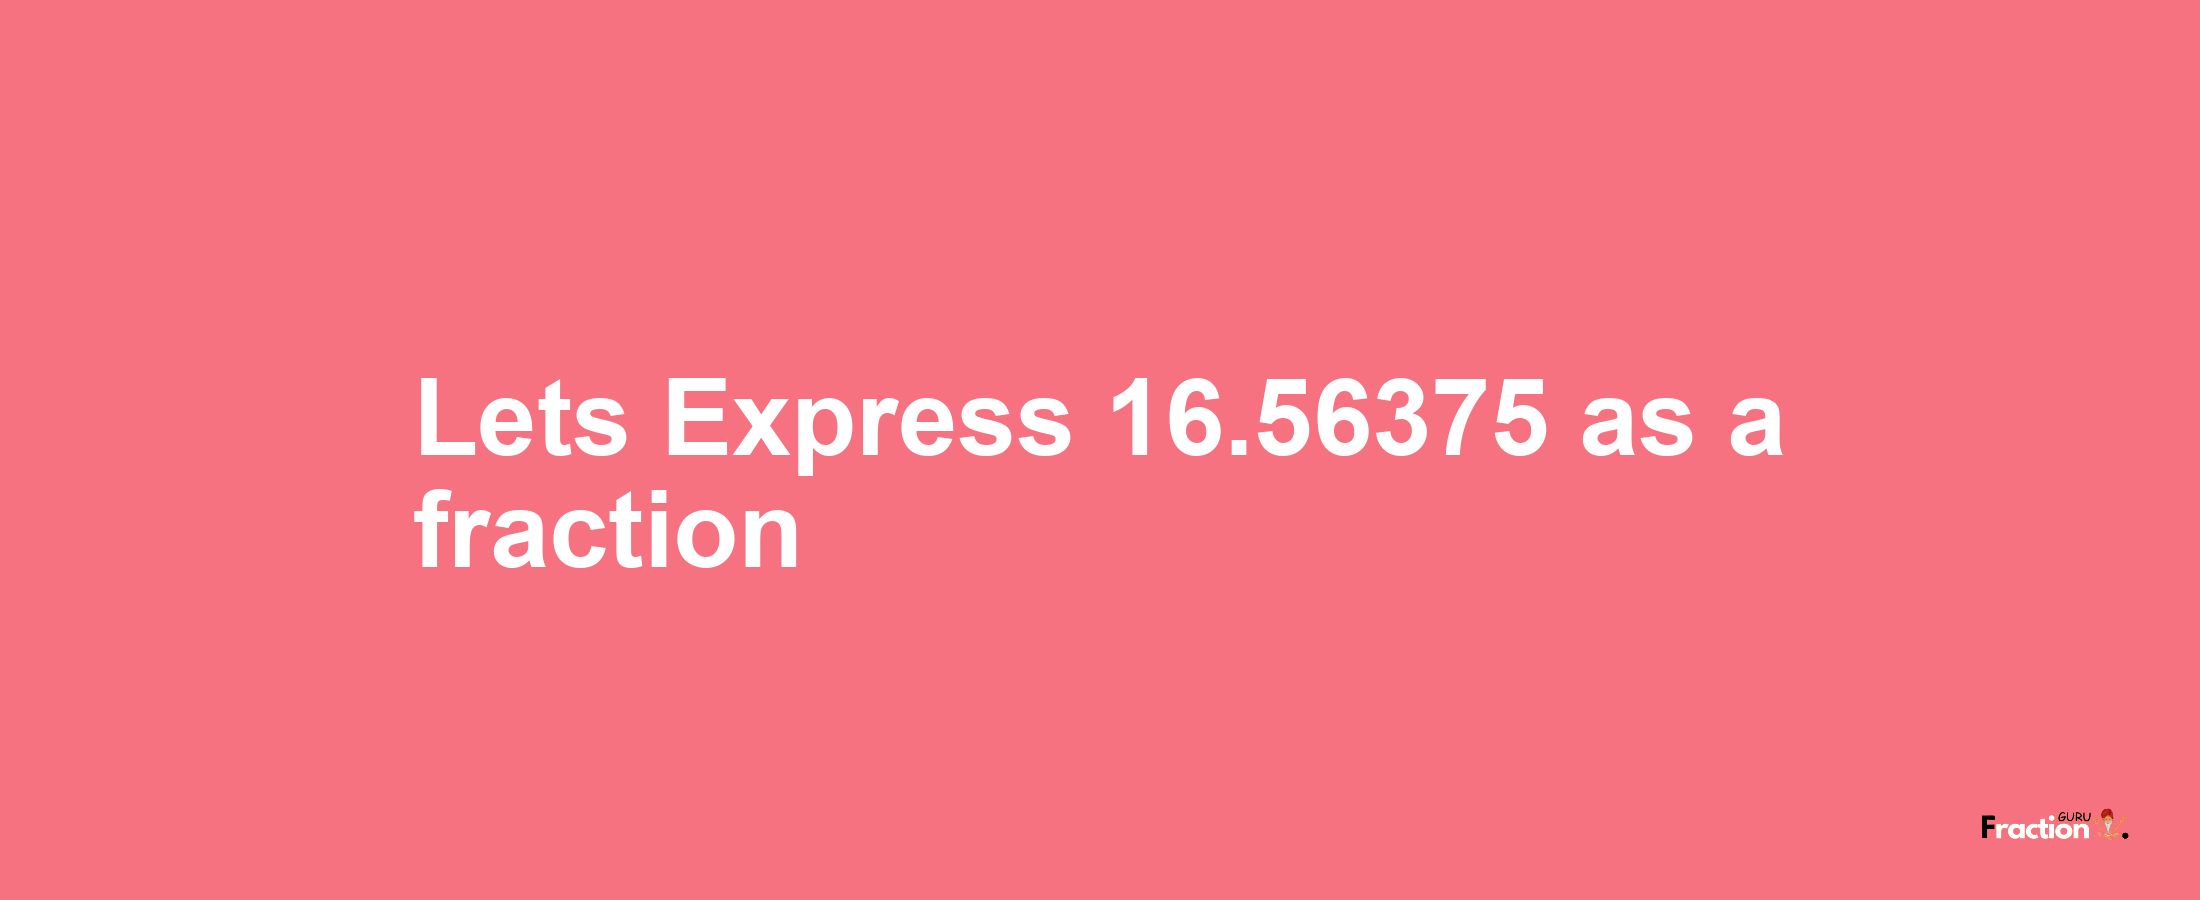 Lets Express 16.56375 as afraction